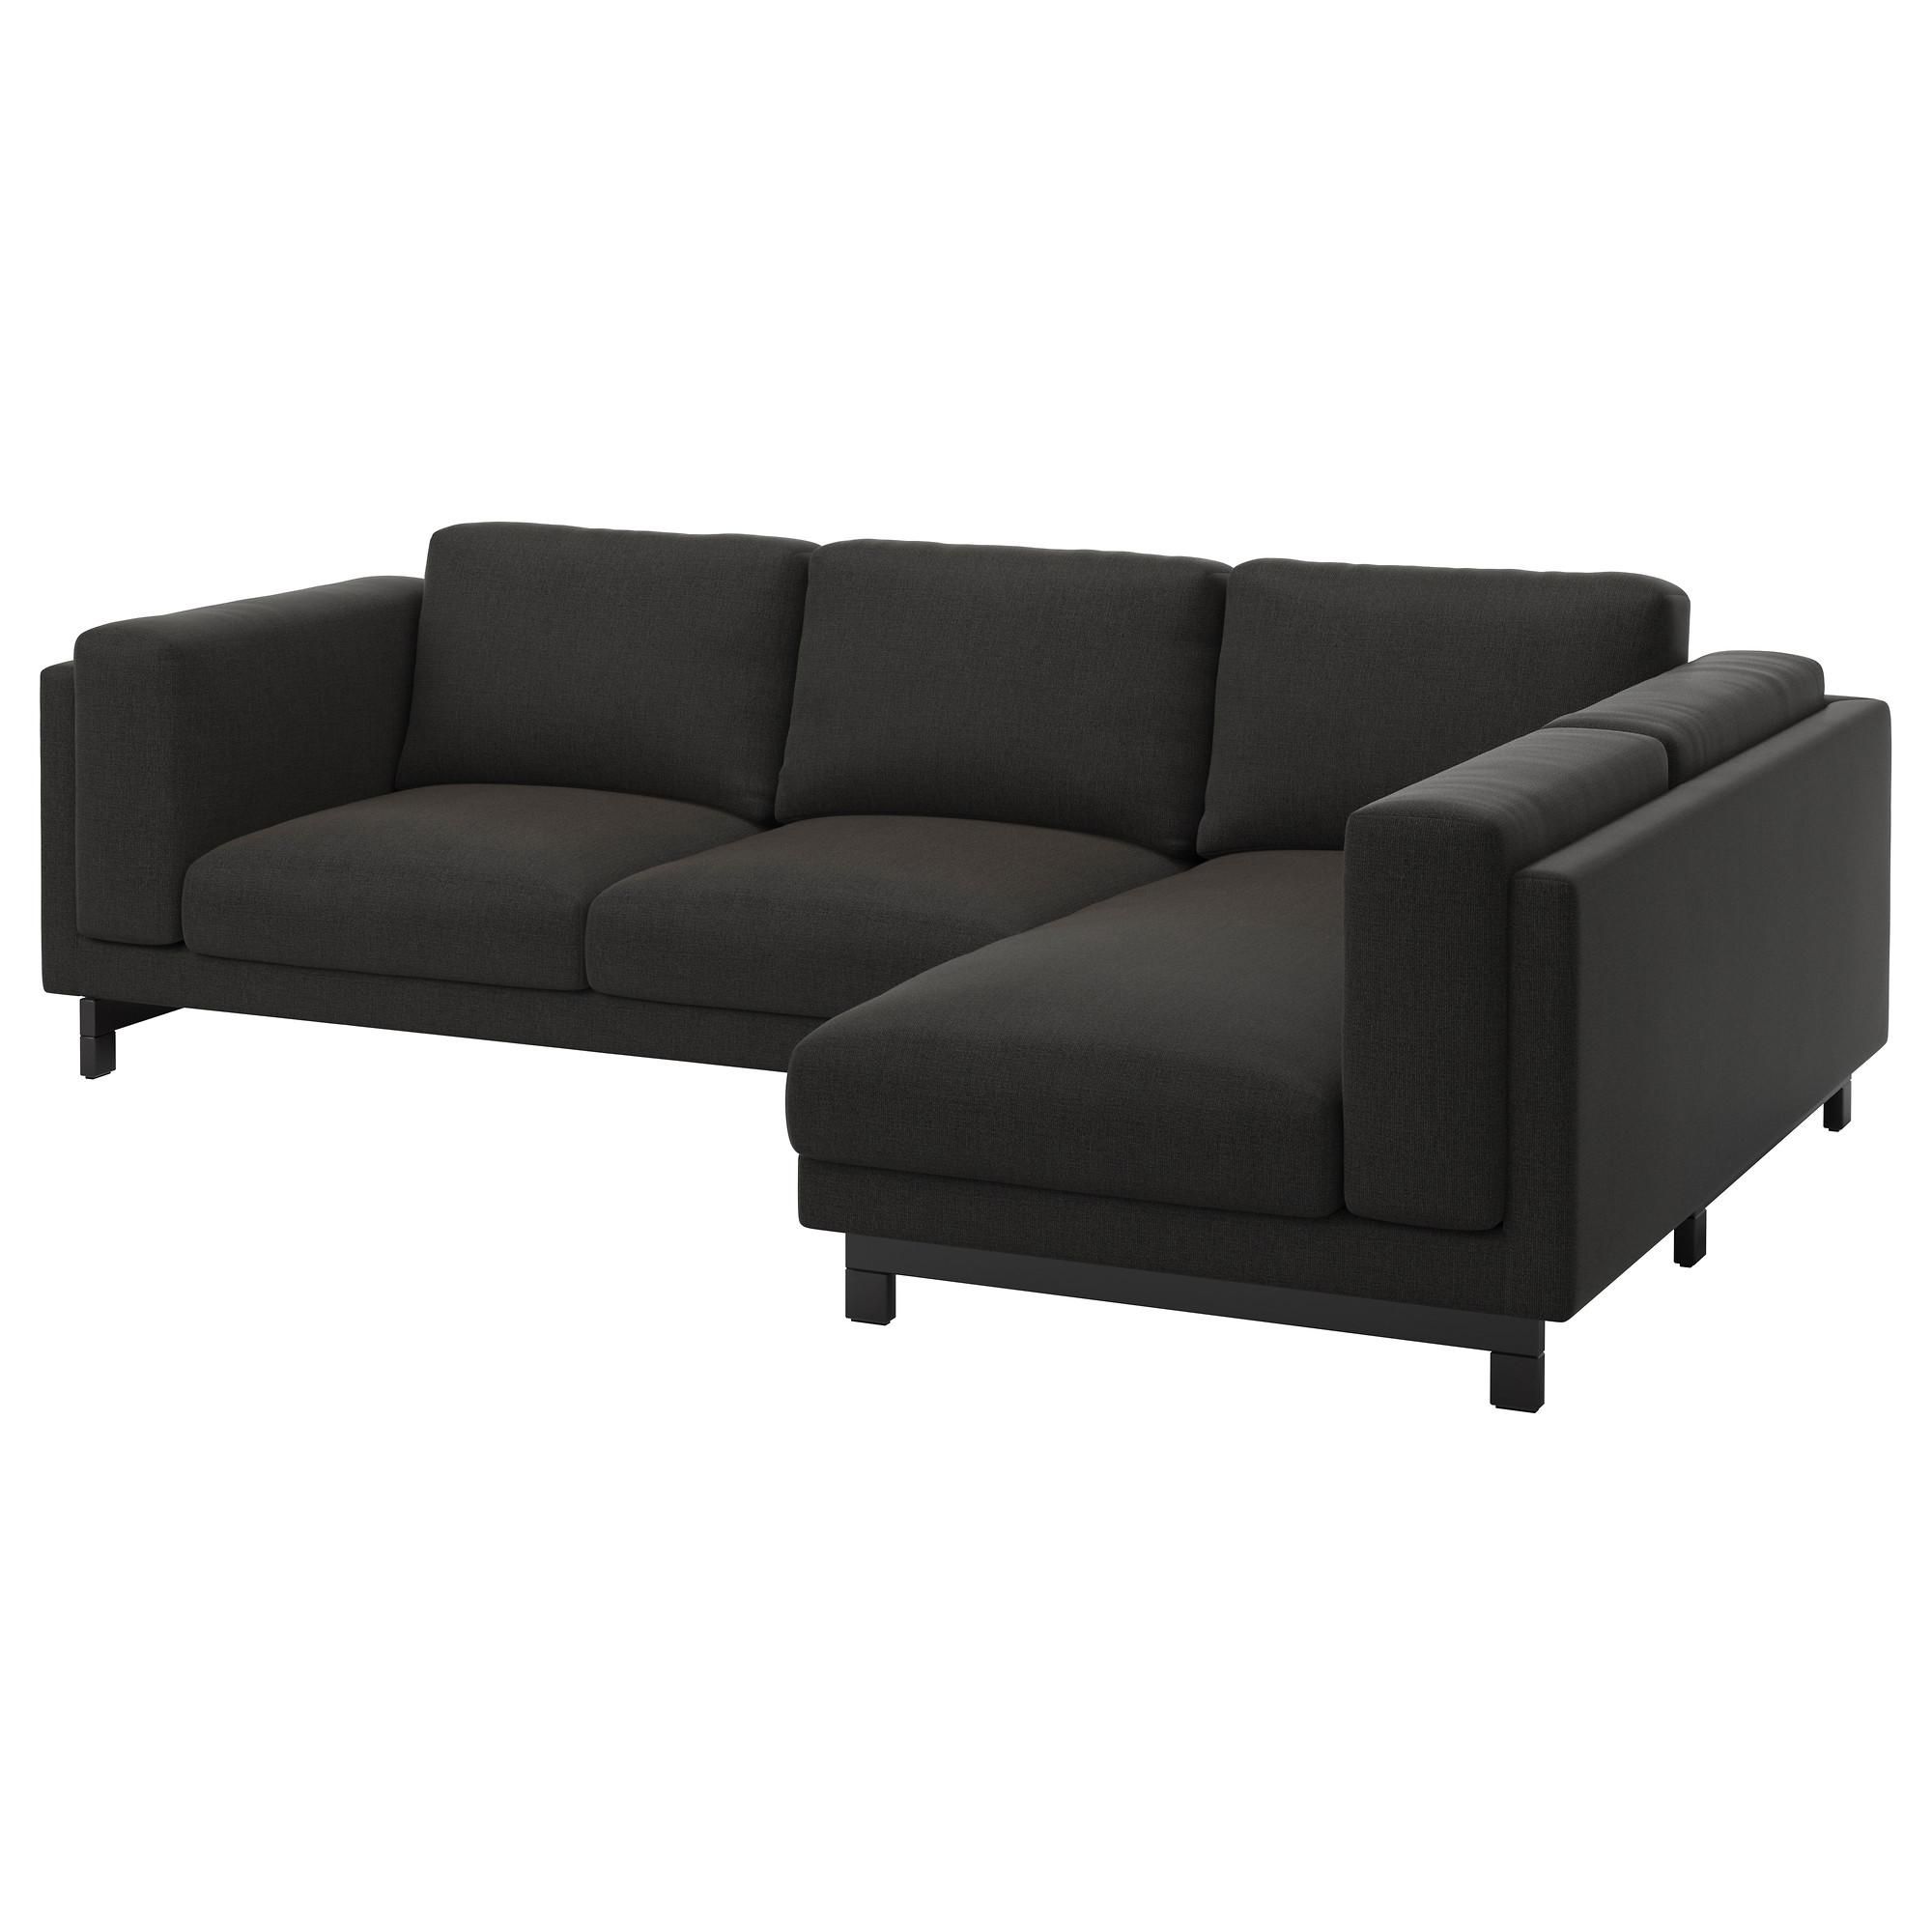 3 Seater Sofa | Ikea For 3 Seater Sofas For Sale (View 15 of 21)